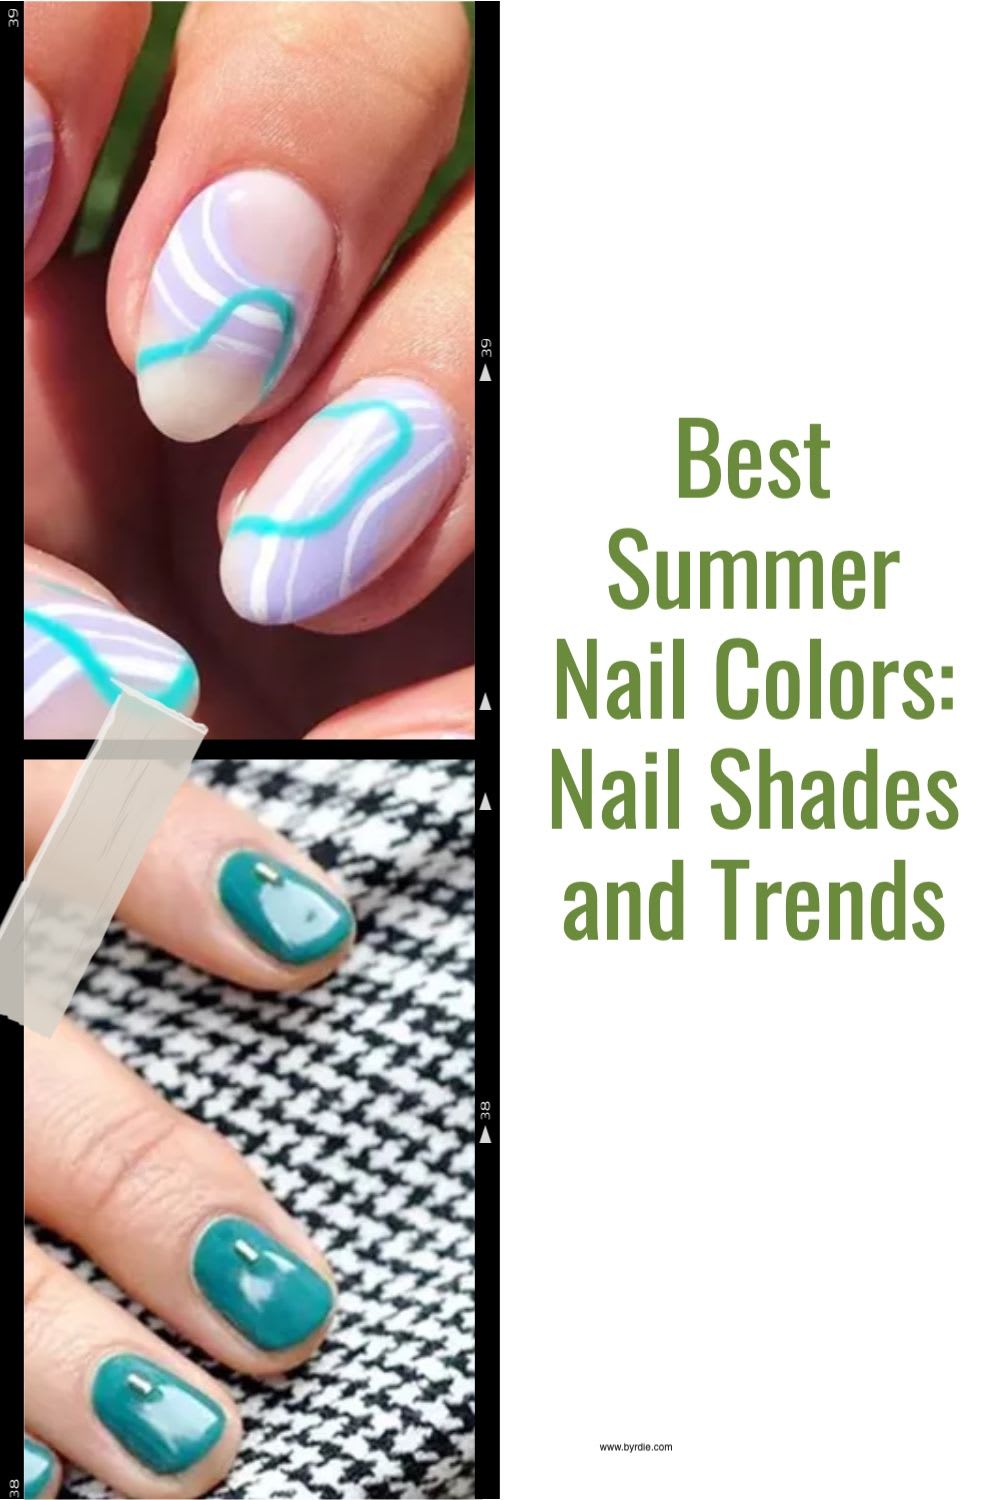 Best Summer Nail Colors: Nail Shades and Trends